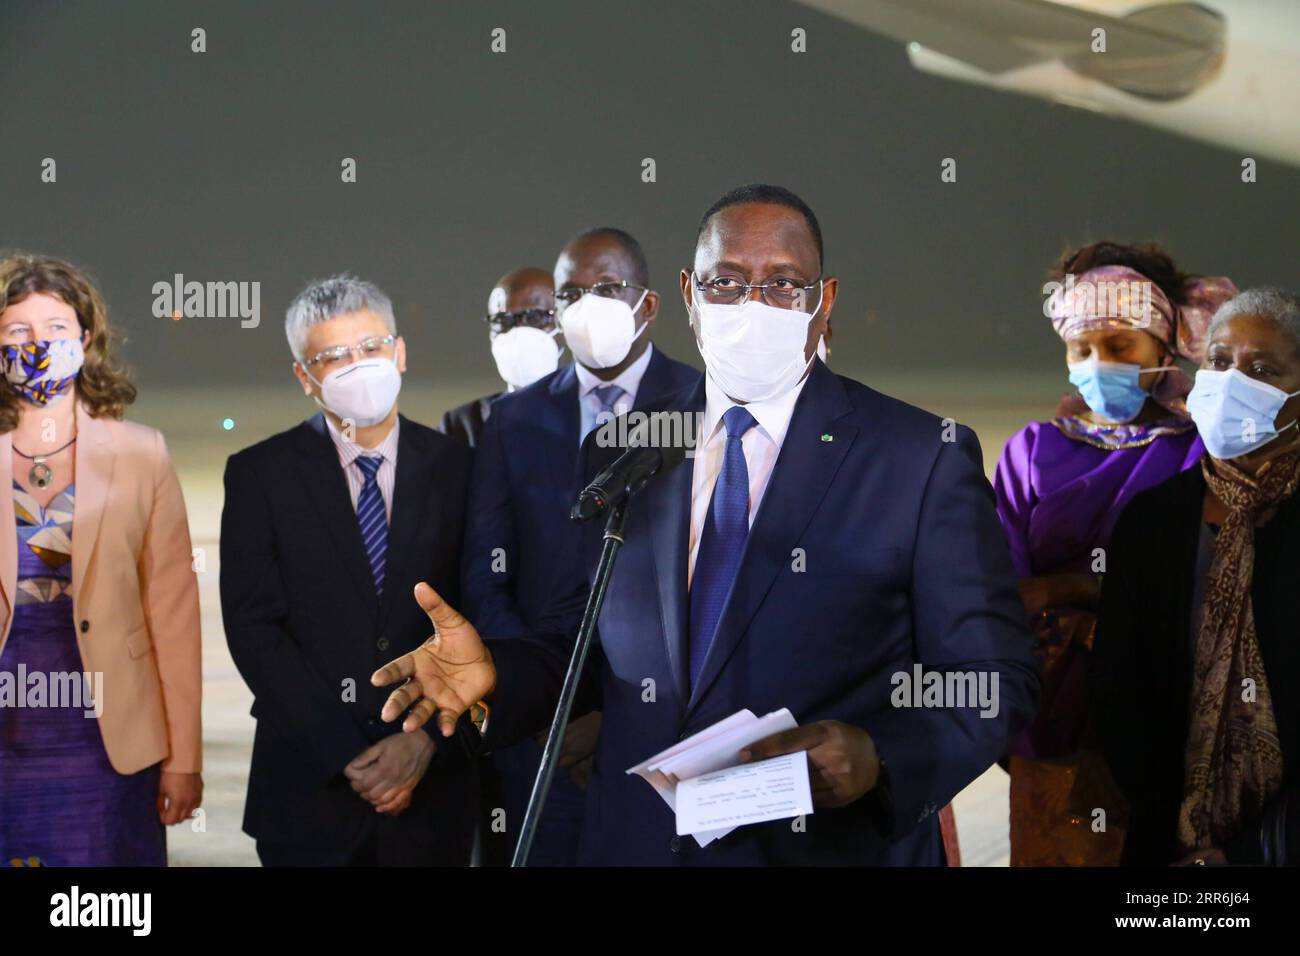 210218 -- DAKAR, Feb. 18, 2021 -- Senegalese President Macky Sall front speaks during the delivery ceremony of the first batch of China s Sinopharm COVID-19 vaccine at Blaise Diagne International Airport in Dakar, Senegal, Feb. 17, 2021. Senegal on Wednesday night received the first batch of China s Sinopharm COVID-19 vaccine.  SENEGAL-DAKAR-CHINESE COVID-19 VACCINE-ARRIVAL XingxJianqiao PUBLICATIONxNOTxINxCHN Stock Photo